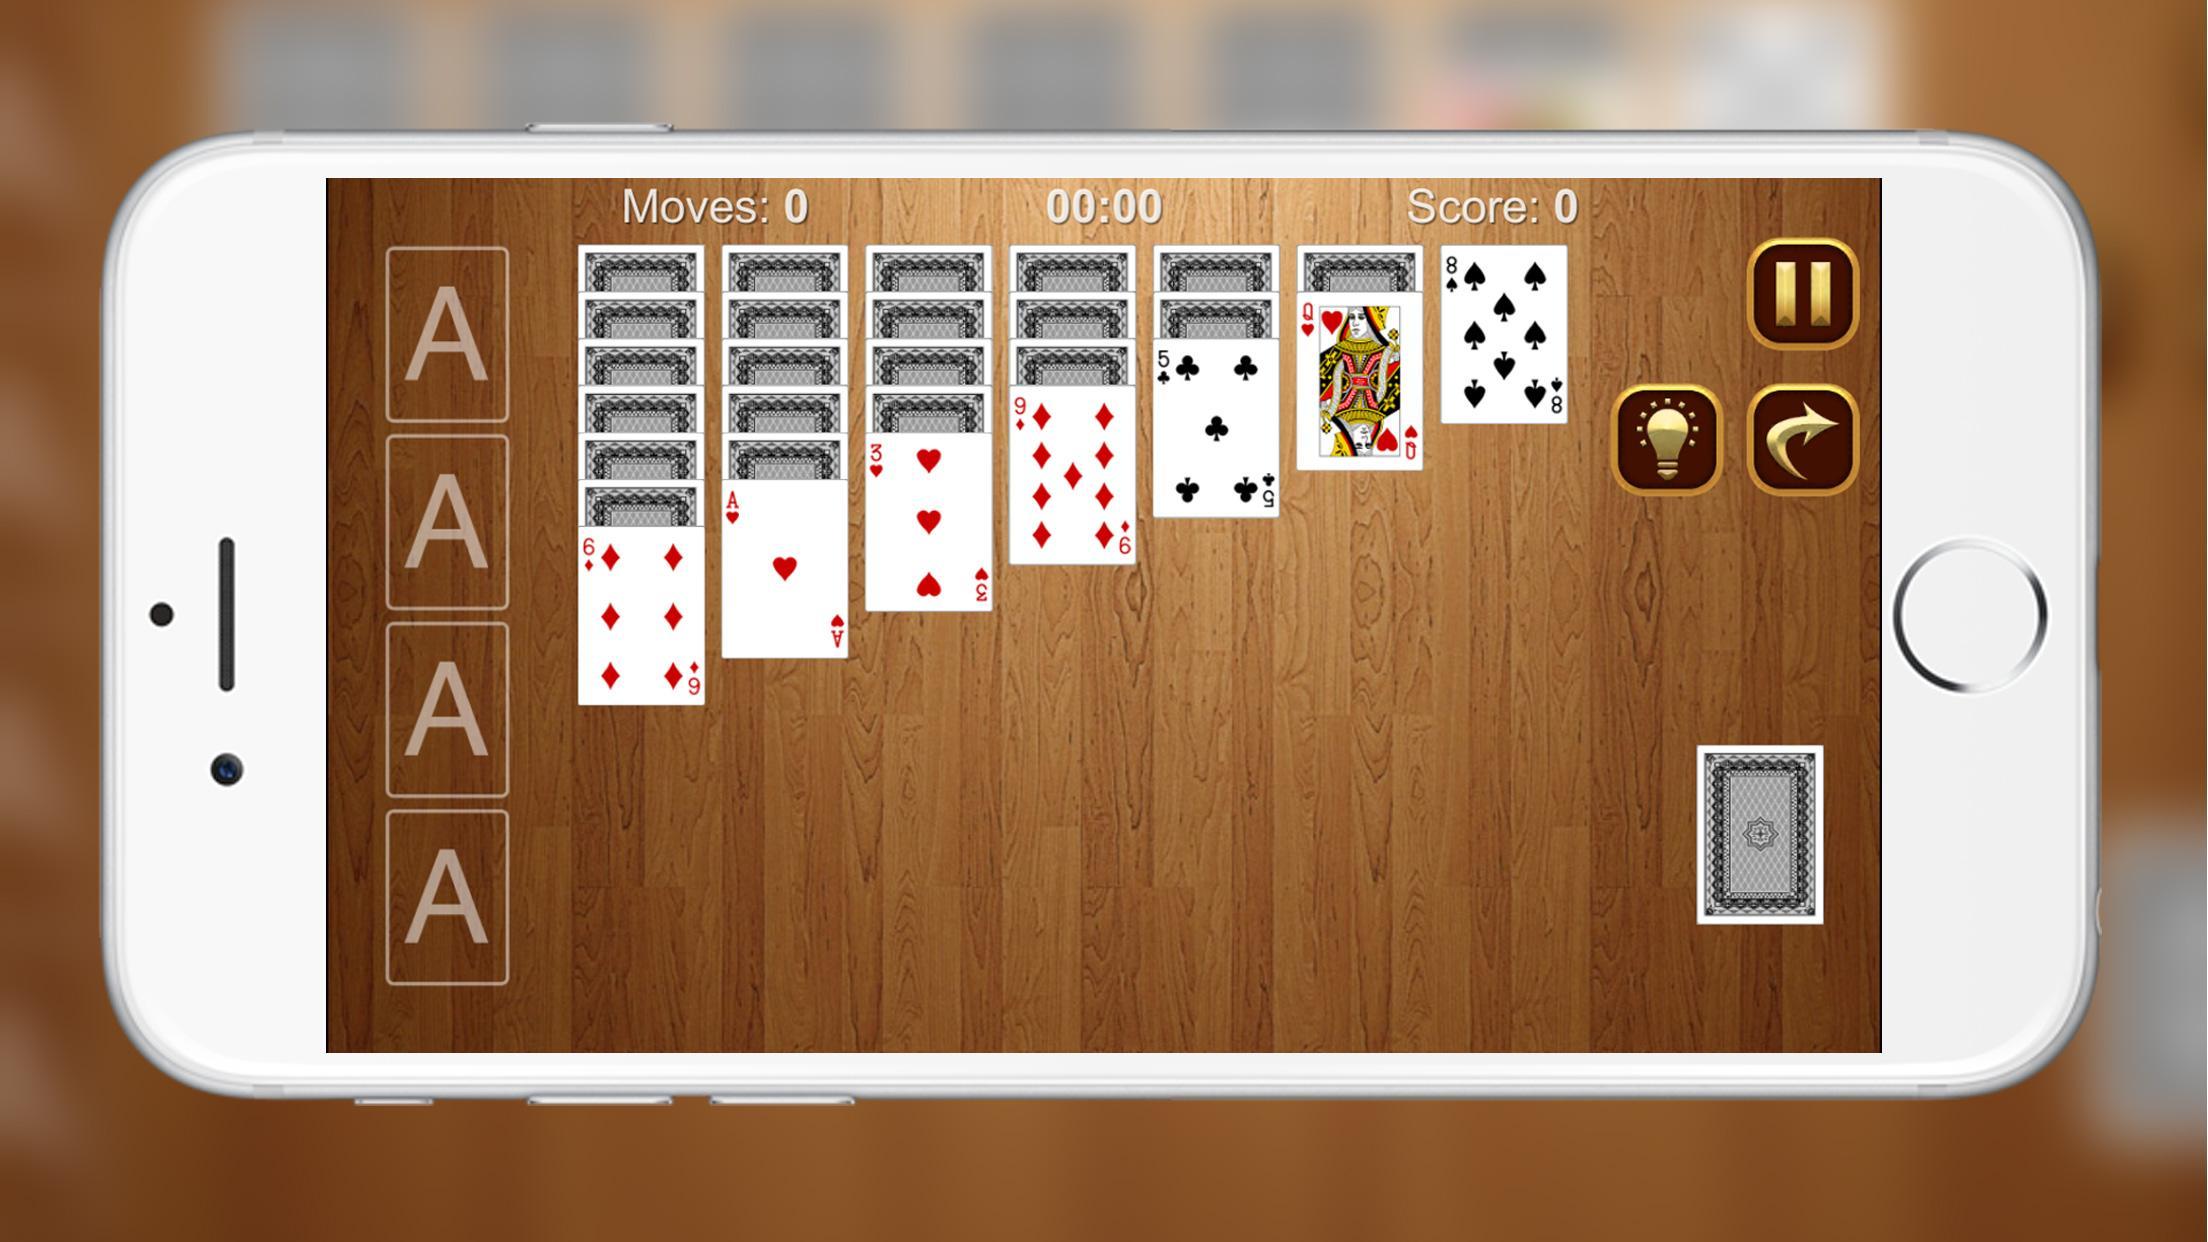 Пасьянс андроид. Solitaire Home Design мод. Solitaire Classic. Solitaire 1 композит. Игра пасьянс андроид